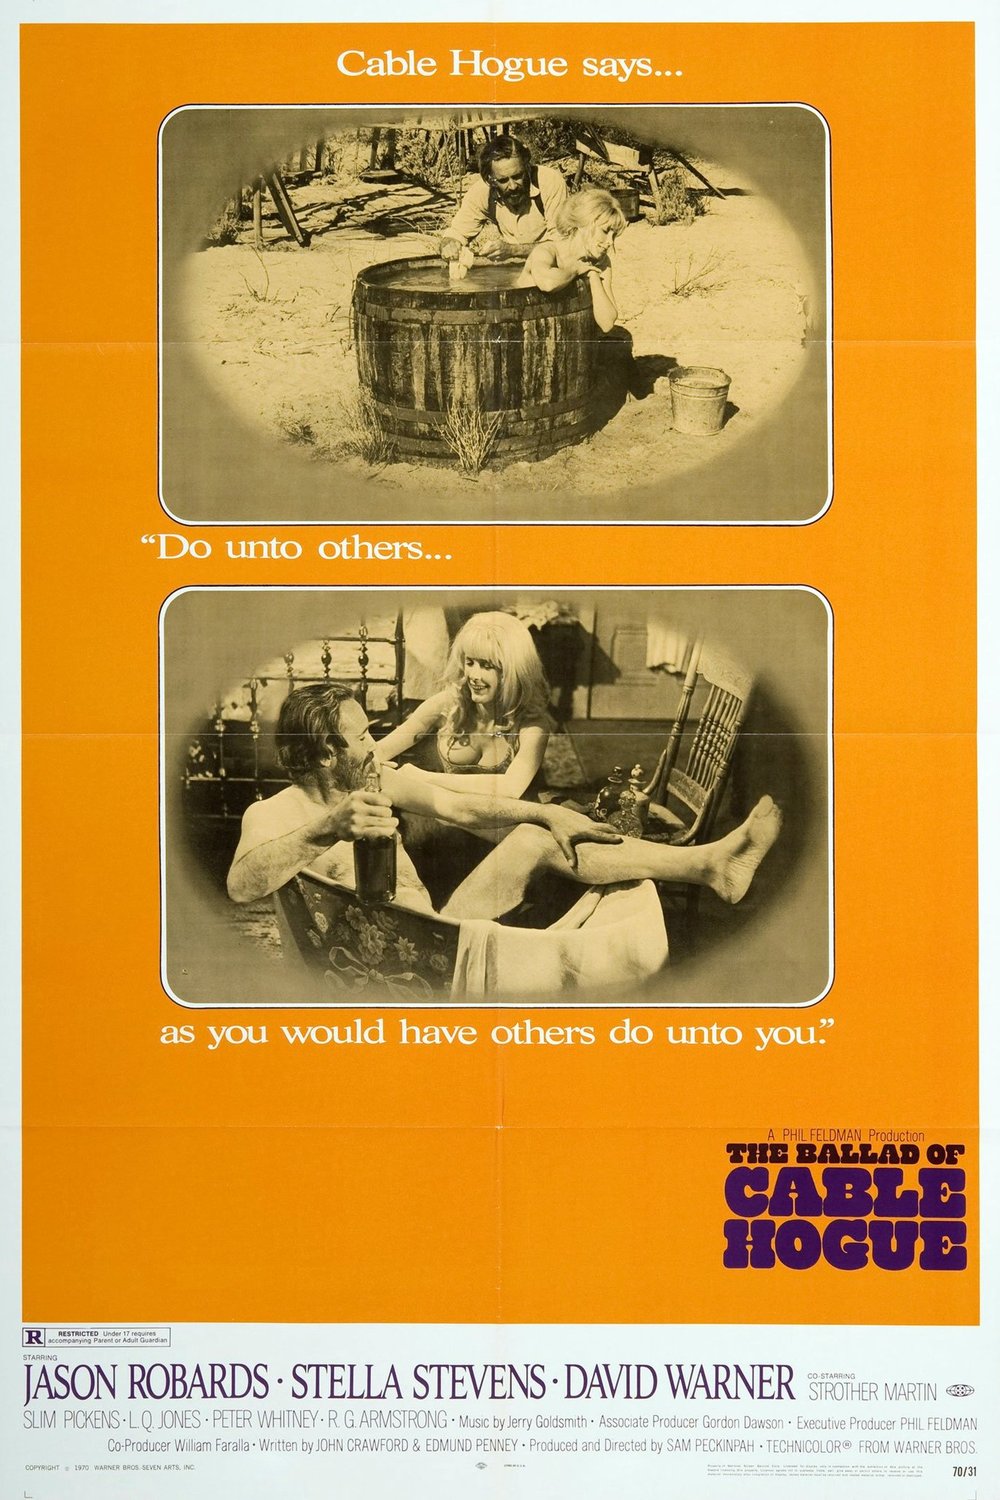 Poster of the movie The Ballad of Cable Hogue